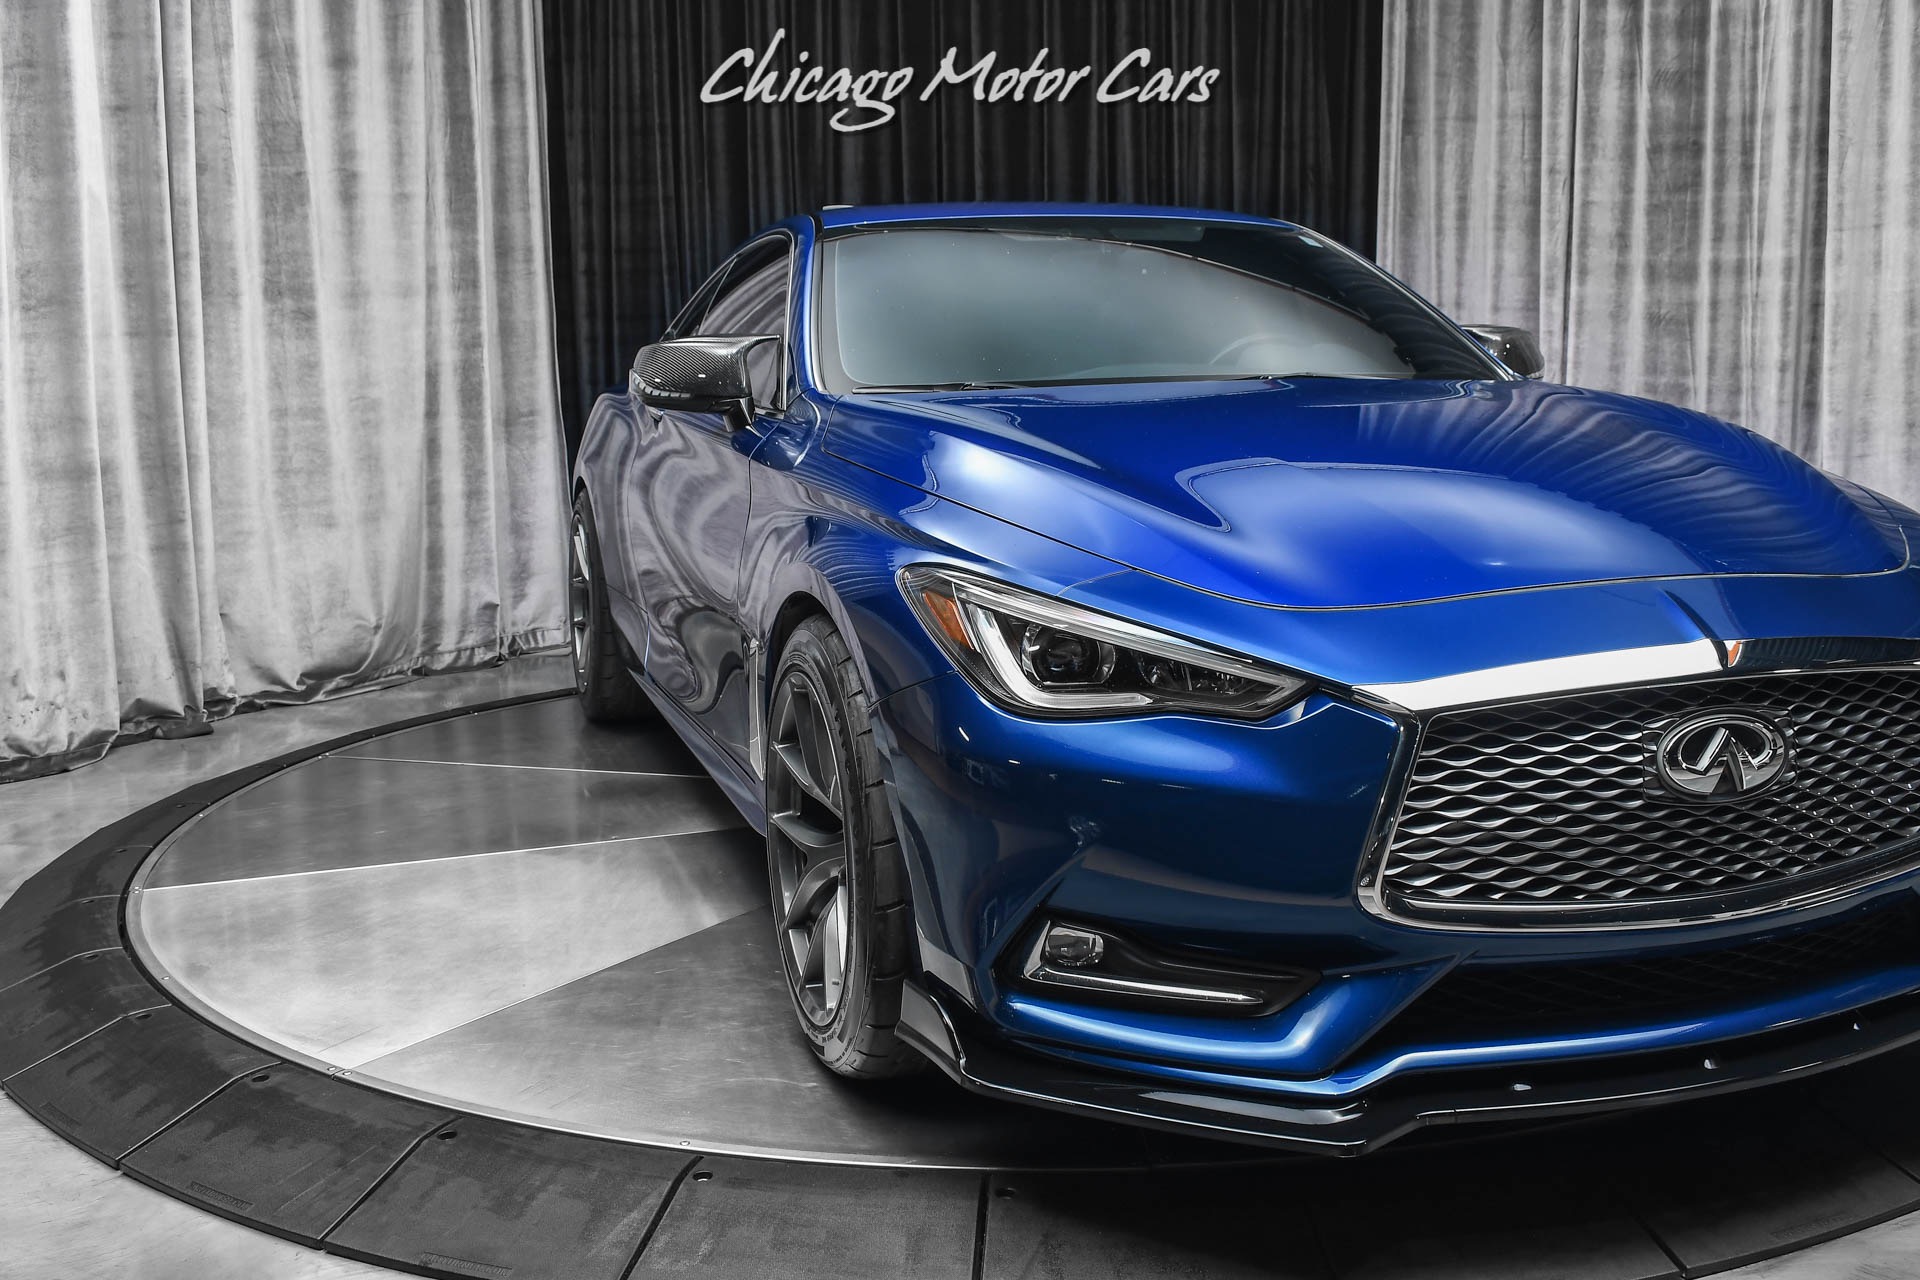 Used-2018-INFINITI-Q60-30T-Sport-Coupe-Sensory-Package-500WHP-AMS-UPGRADES-SONIC-TUNED